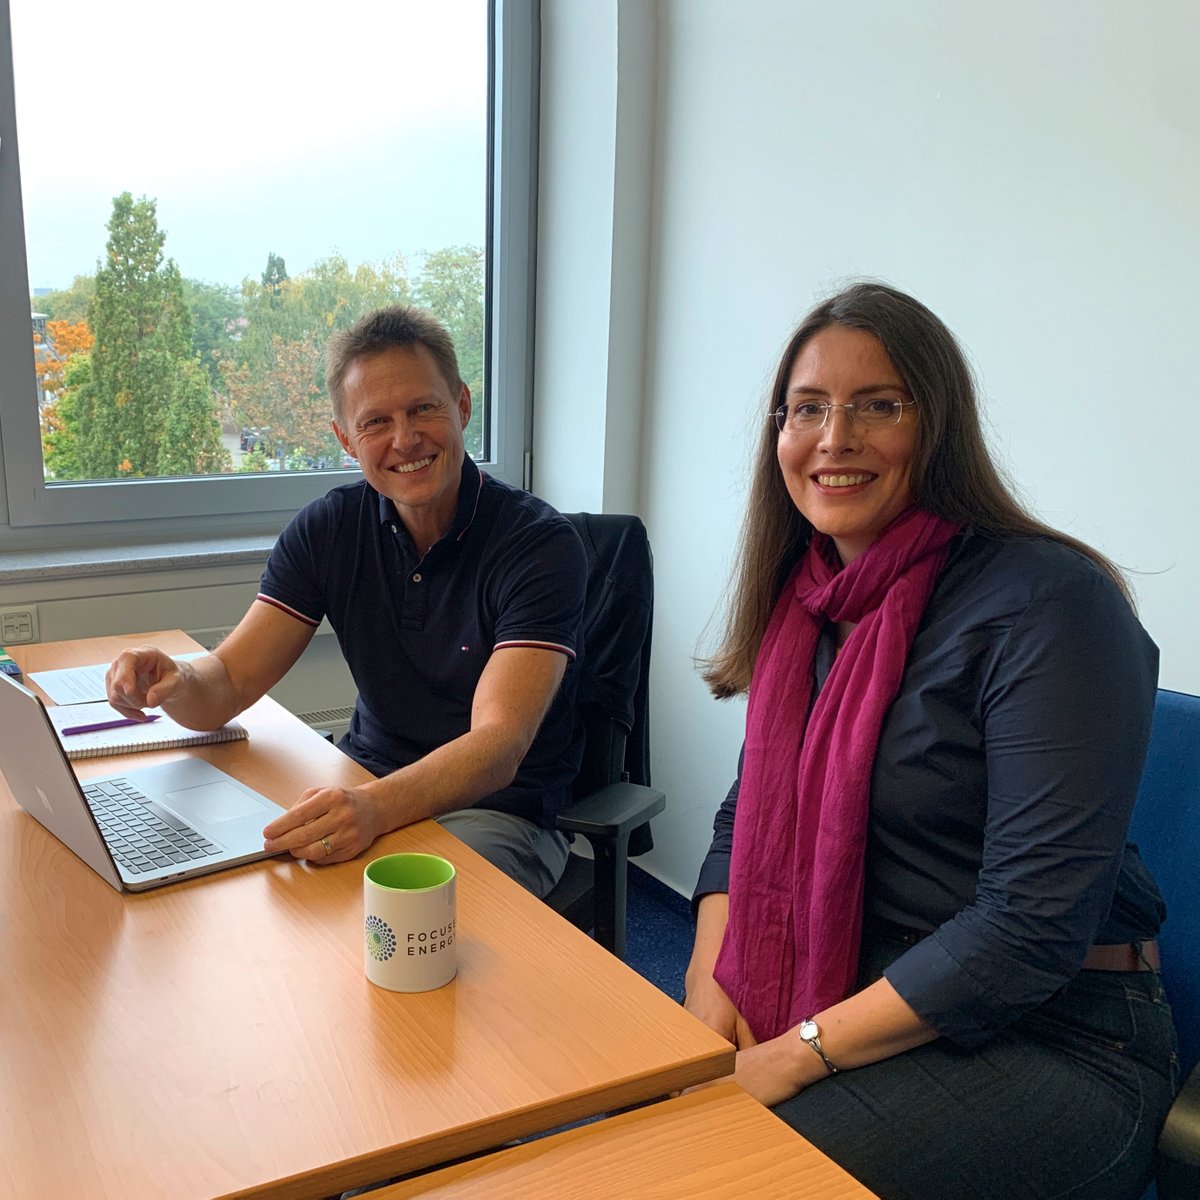 We already have the top scientists and engineers for #laser-based #fusion on board. Our co-founder and CEO, @ThomasForner2, and Vera Wyderka, Head of HR, are discussing the next strategic hires.